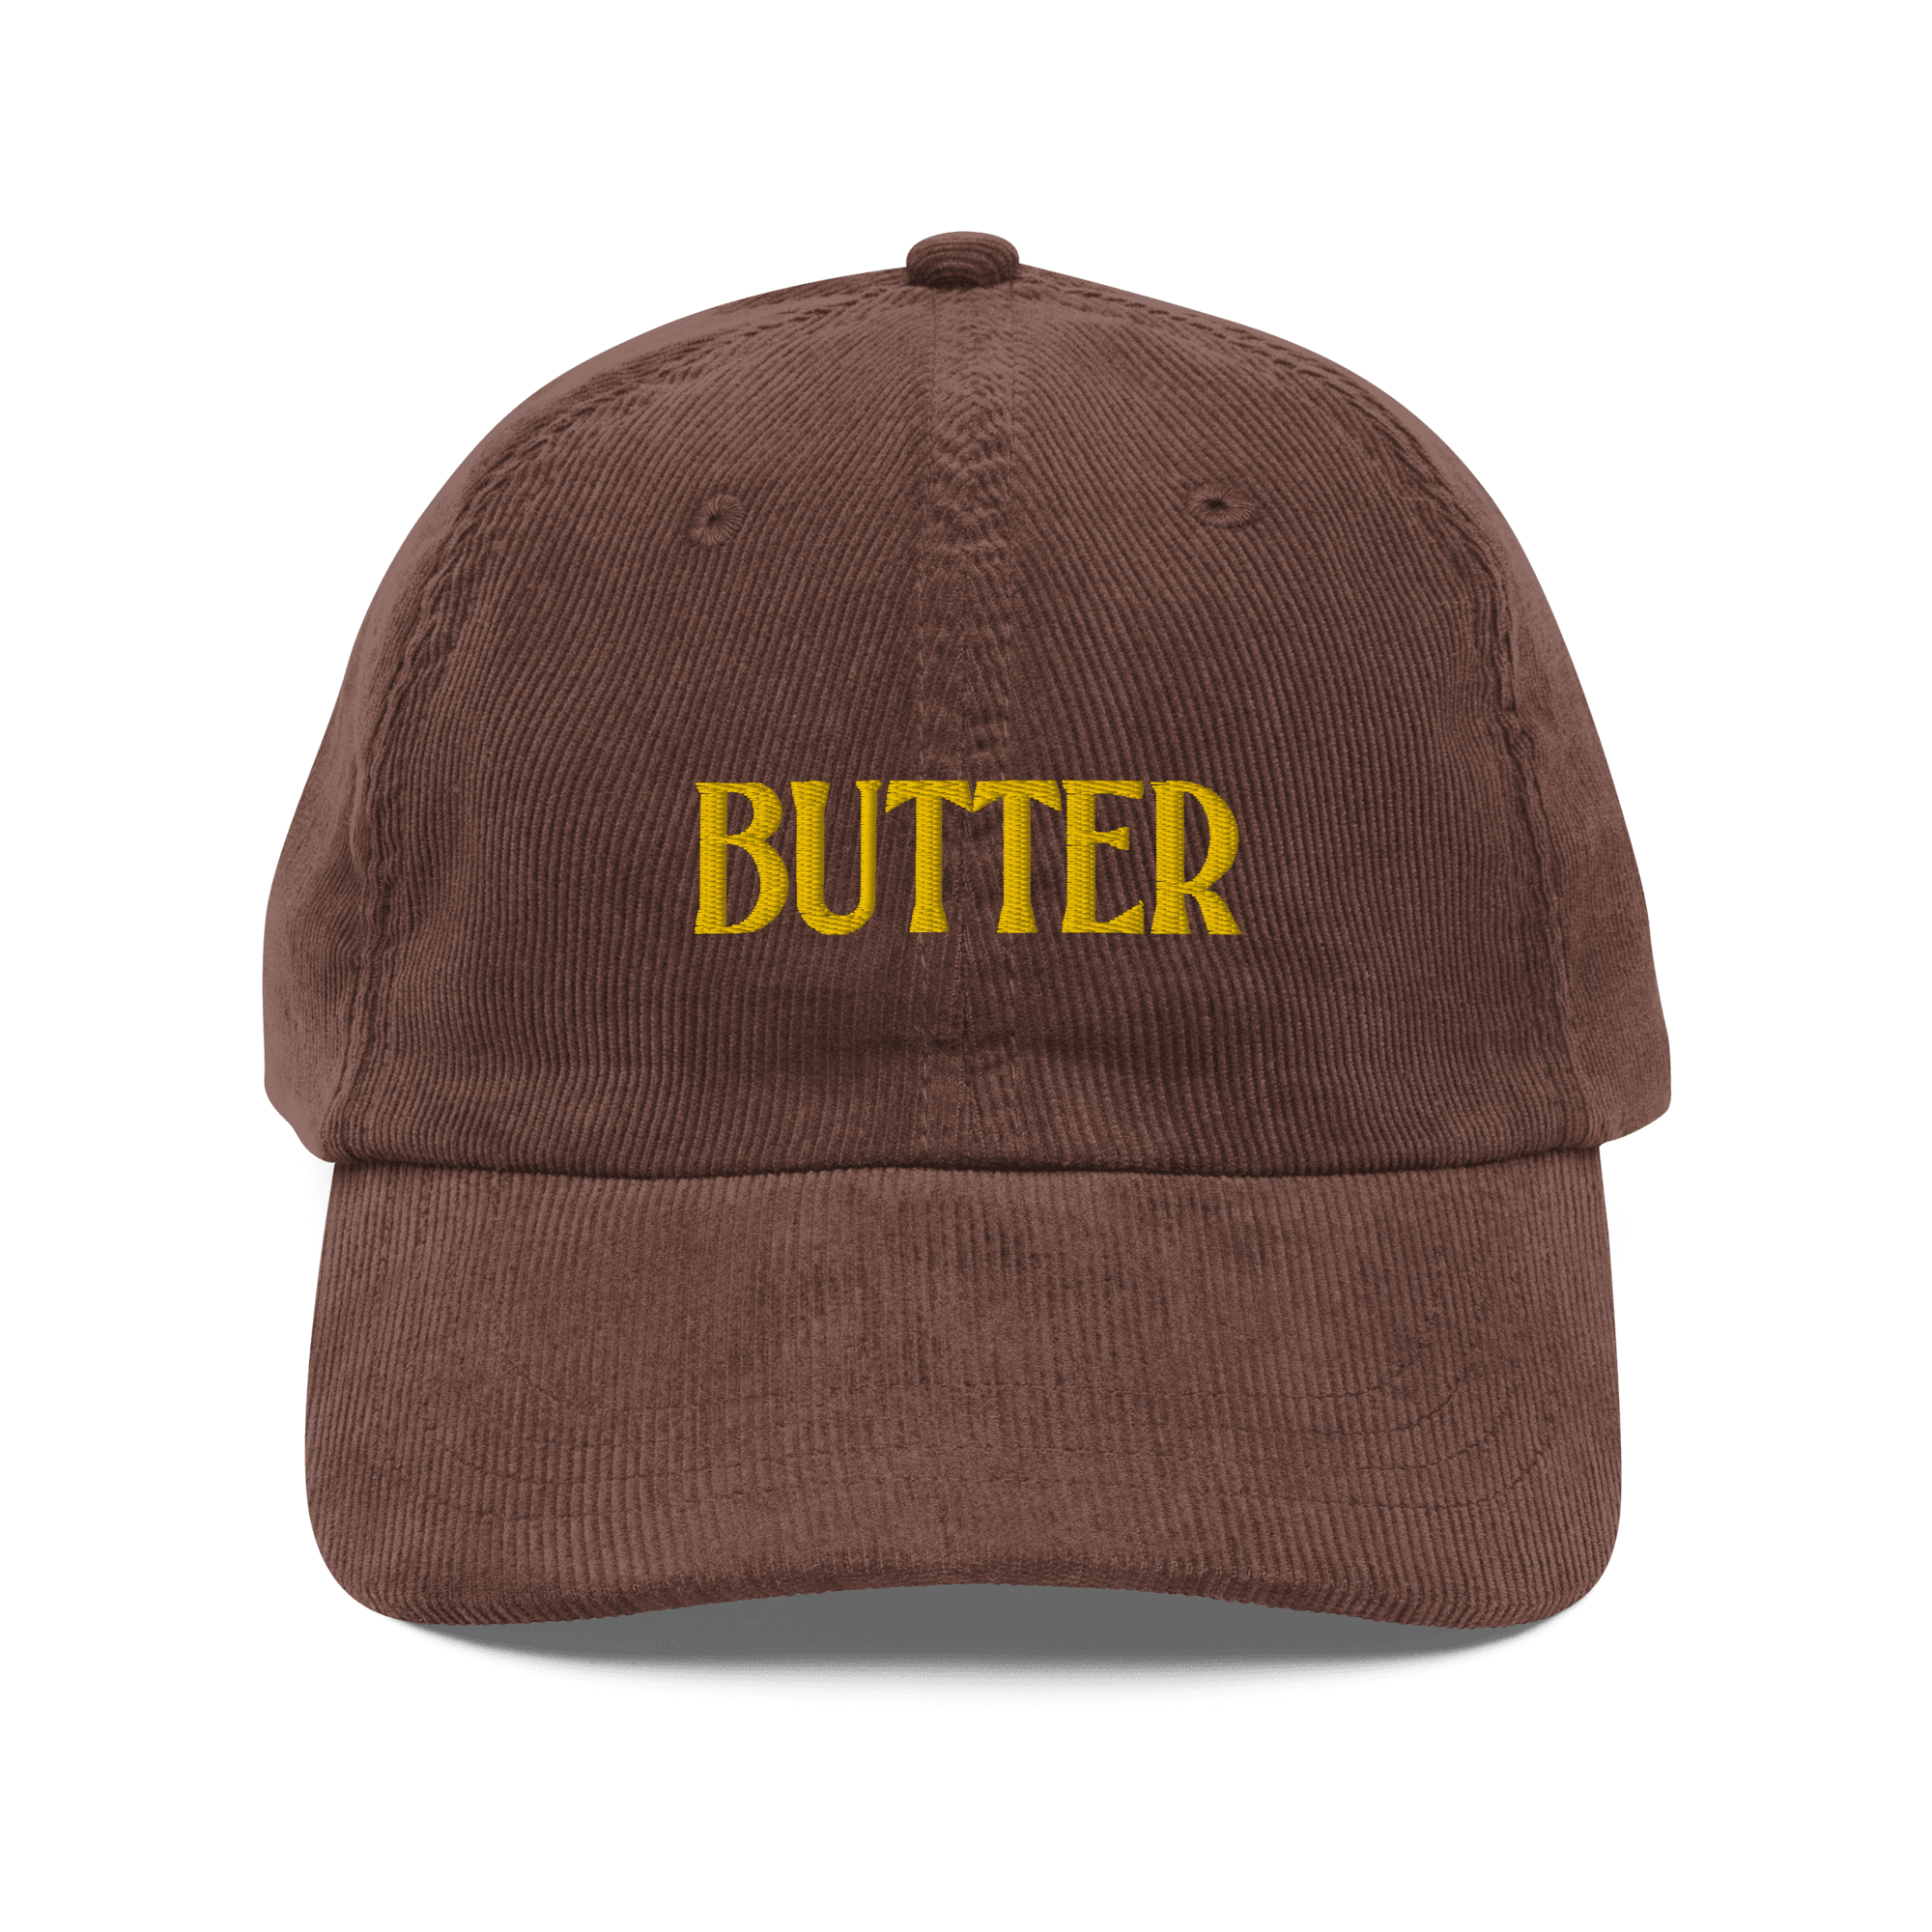 Butter Embroidered Courduroy Hat Polychrome Goods 🍊